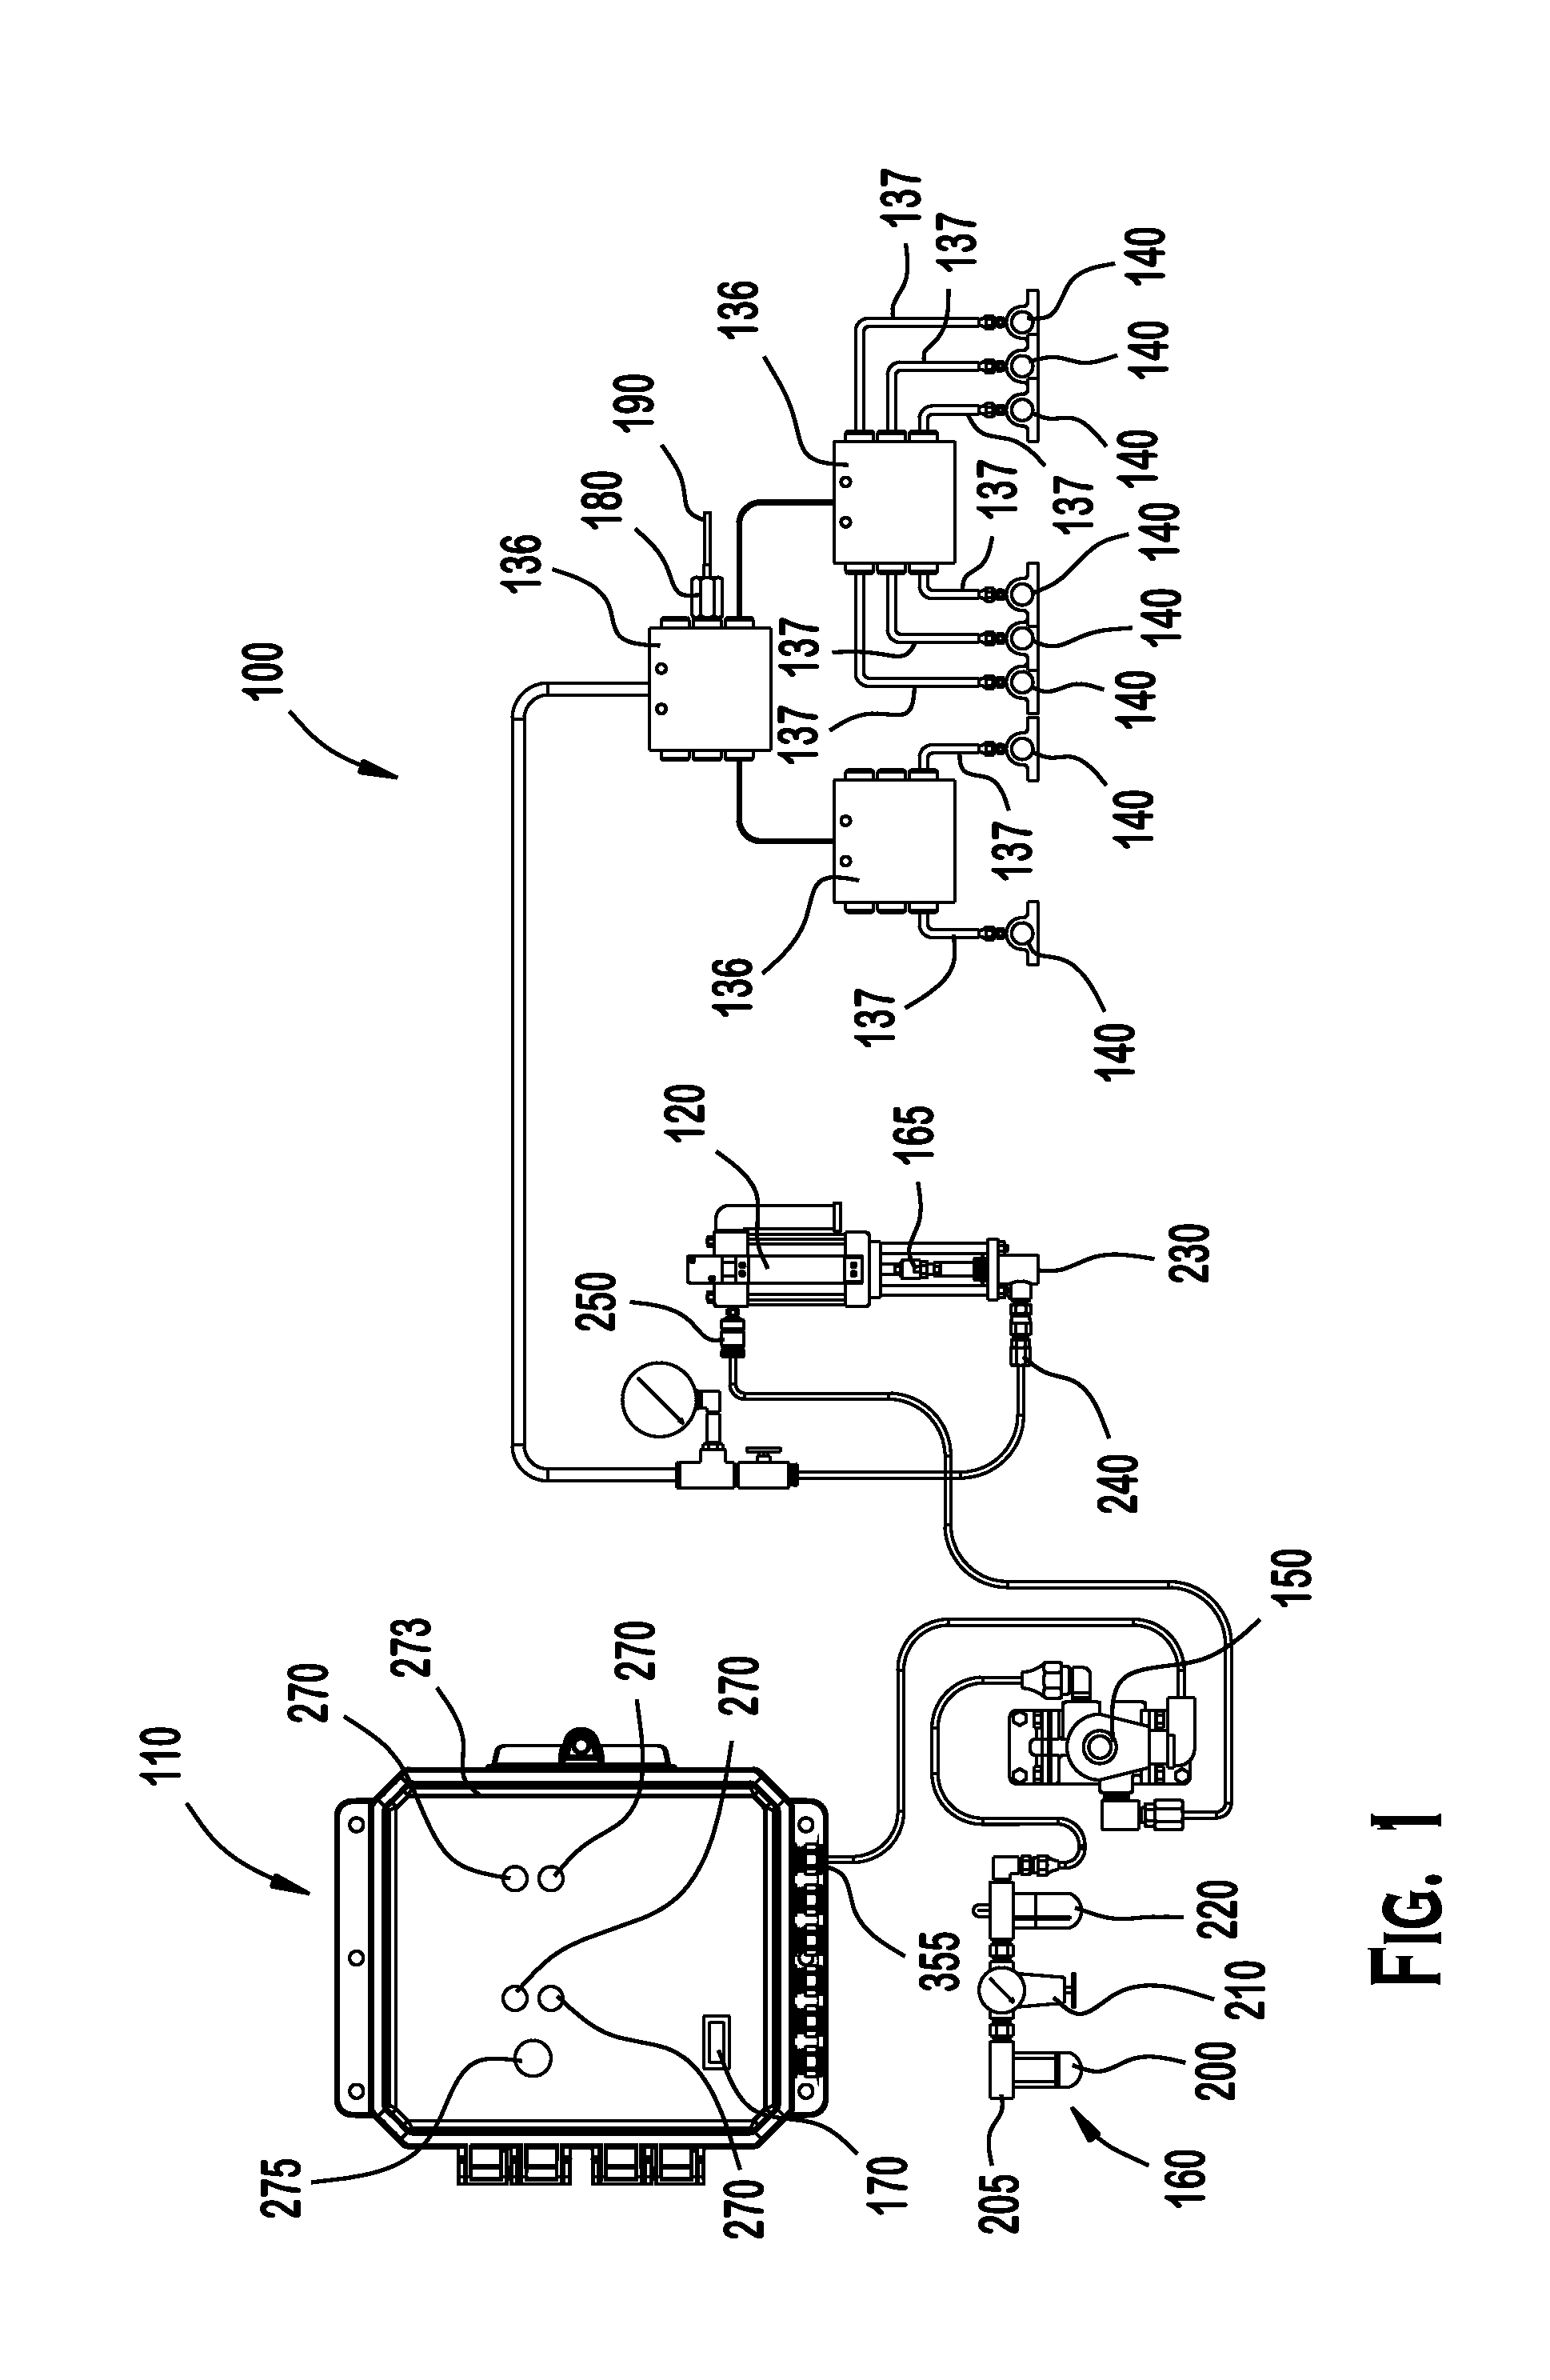 Lubrication system and controller